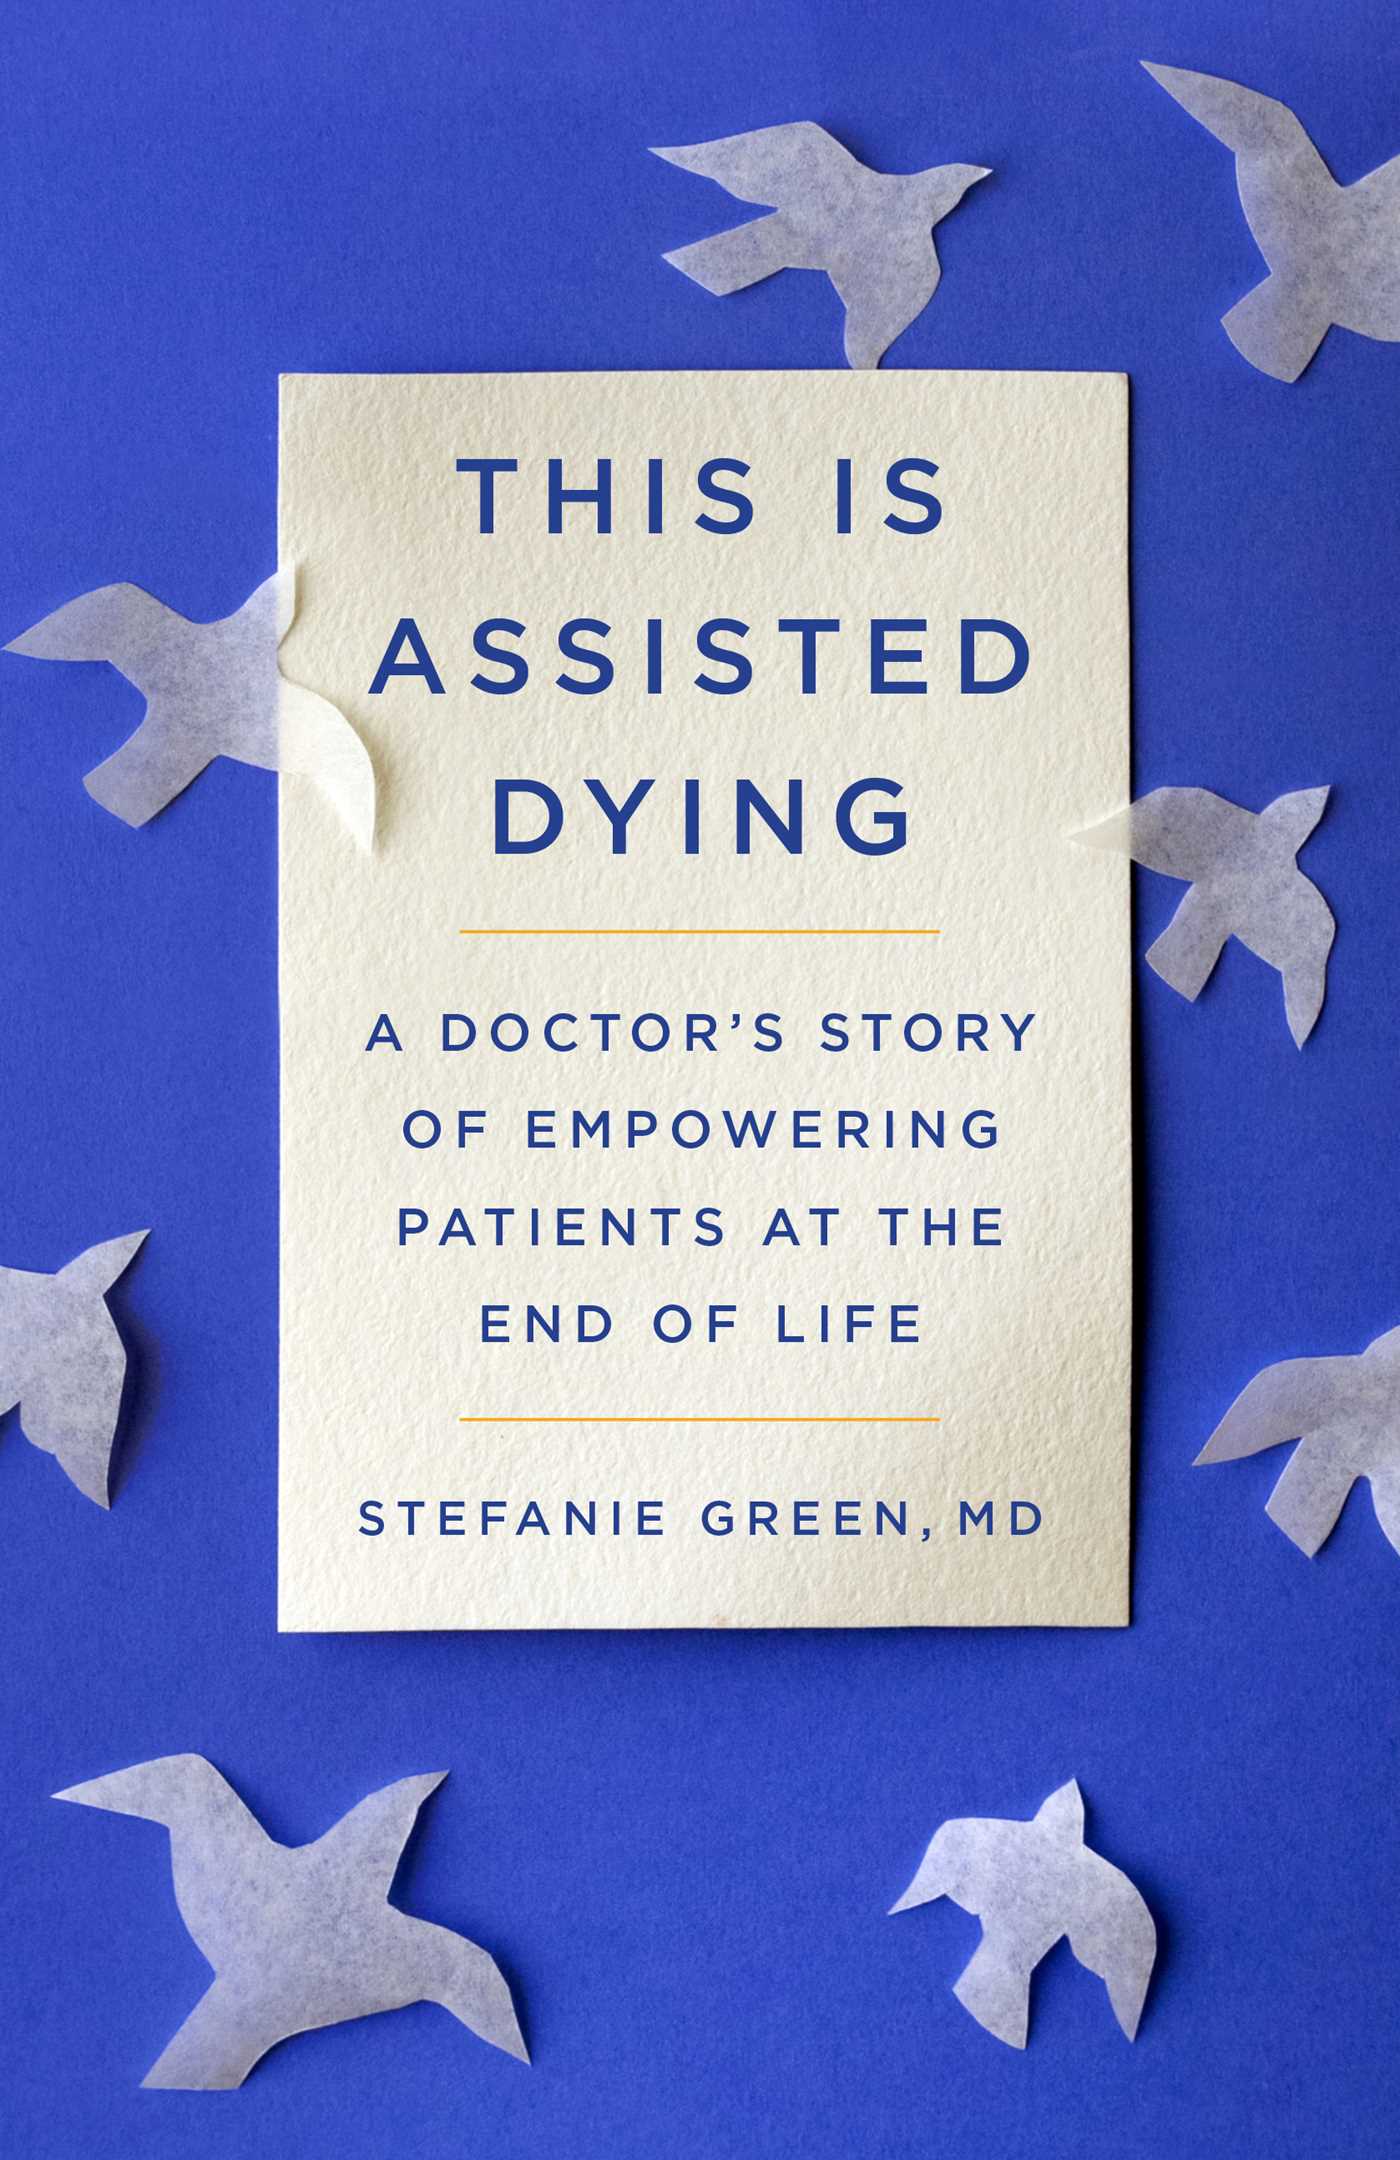 Image for "This Is Assisted Dying"